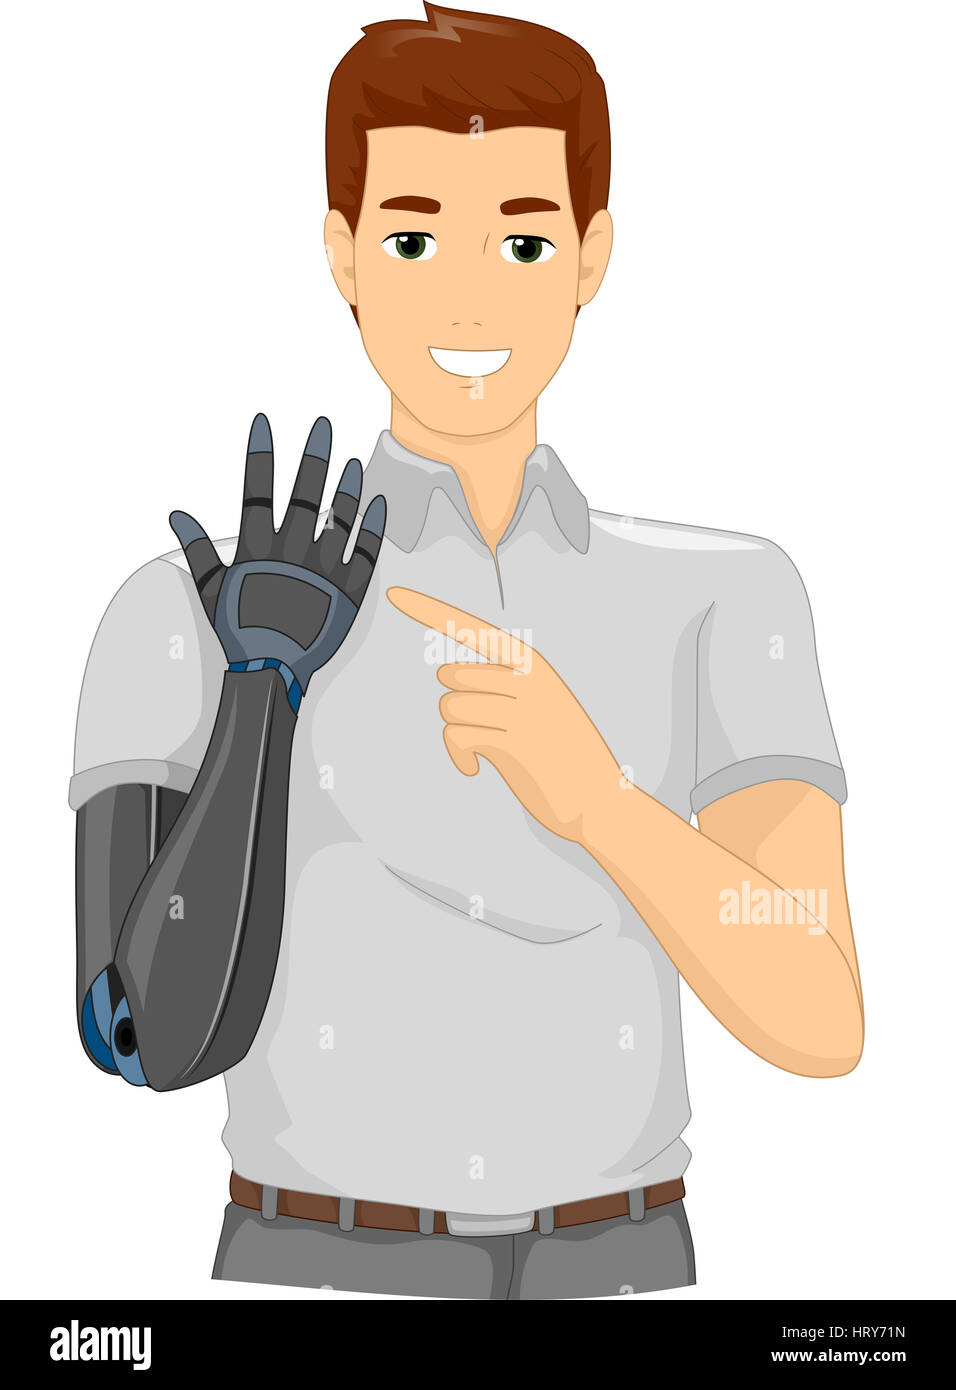 Illustration of a Proud Man Pointing to His Prosthetic Arm Stock Photo